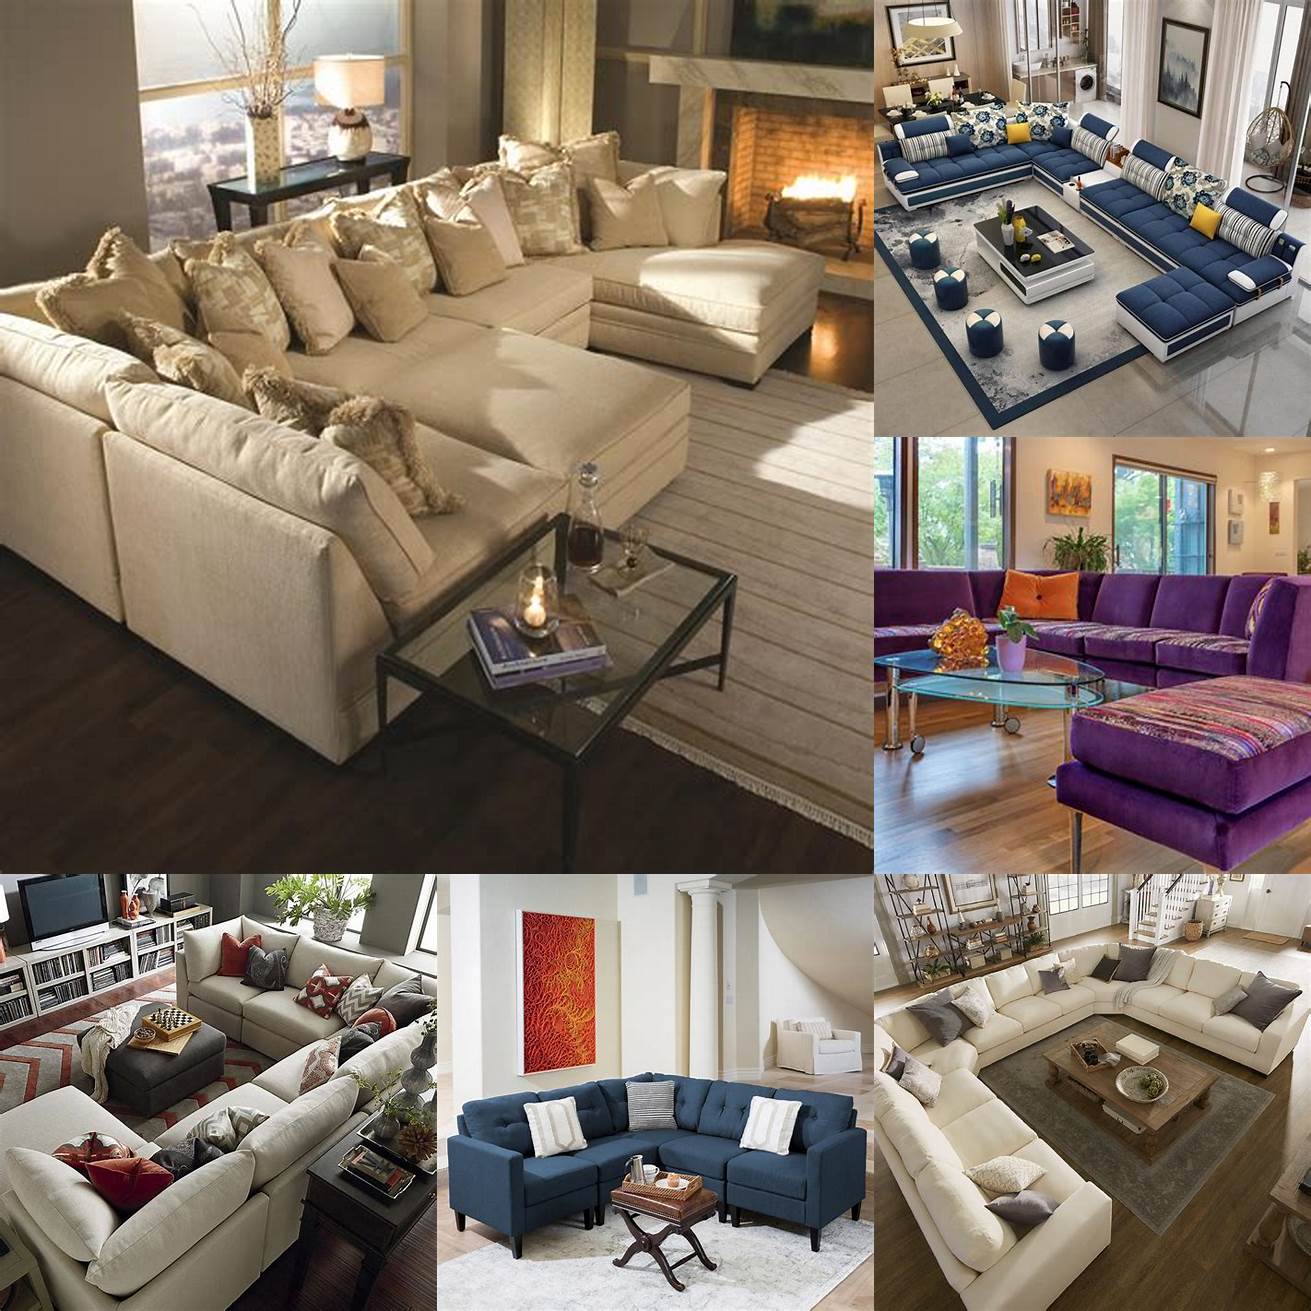 Sectional in a contemporary style